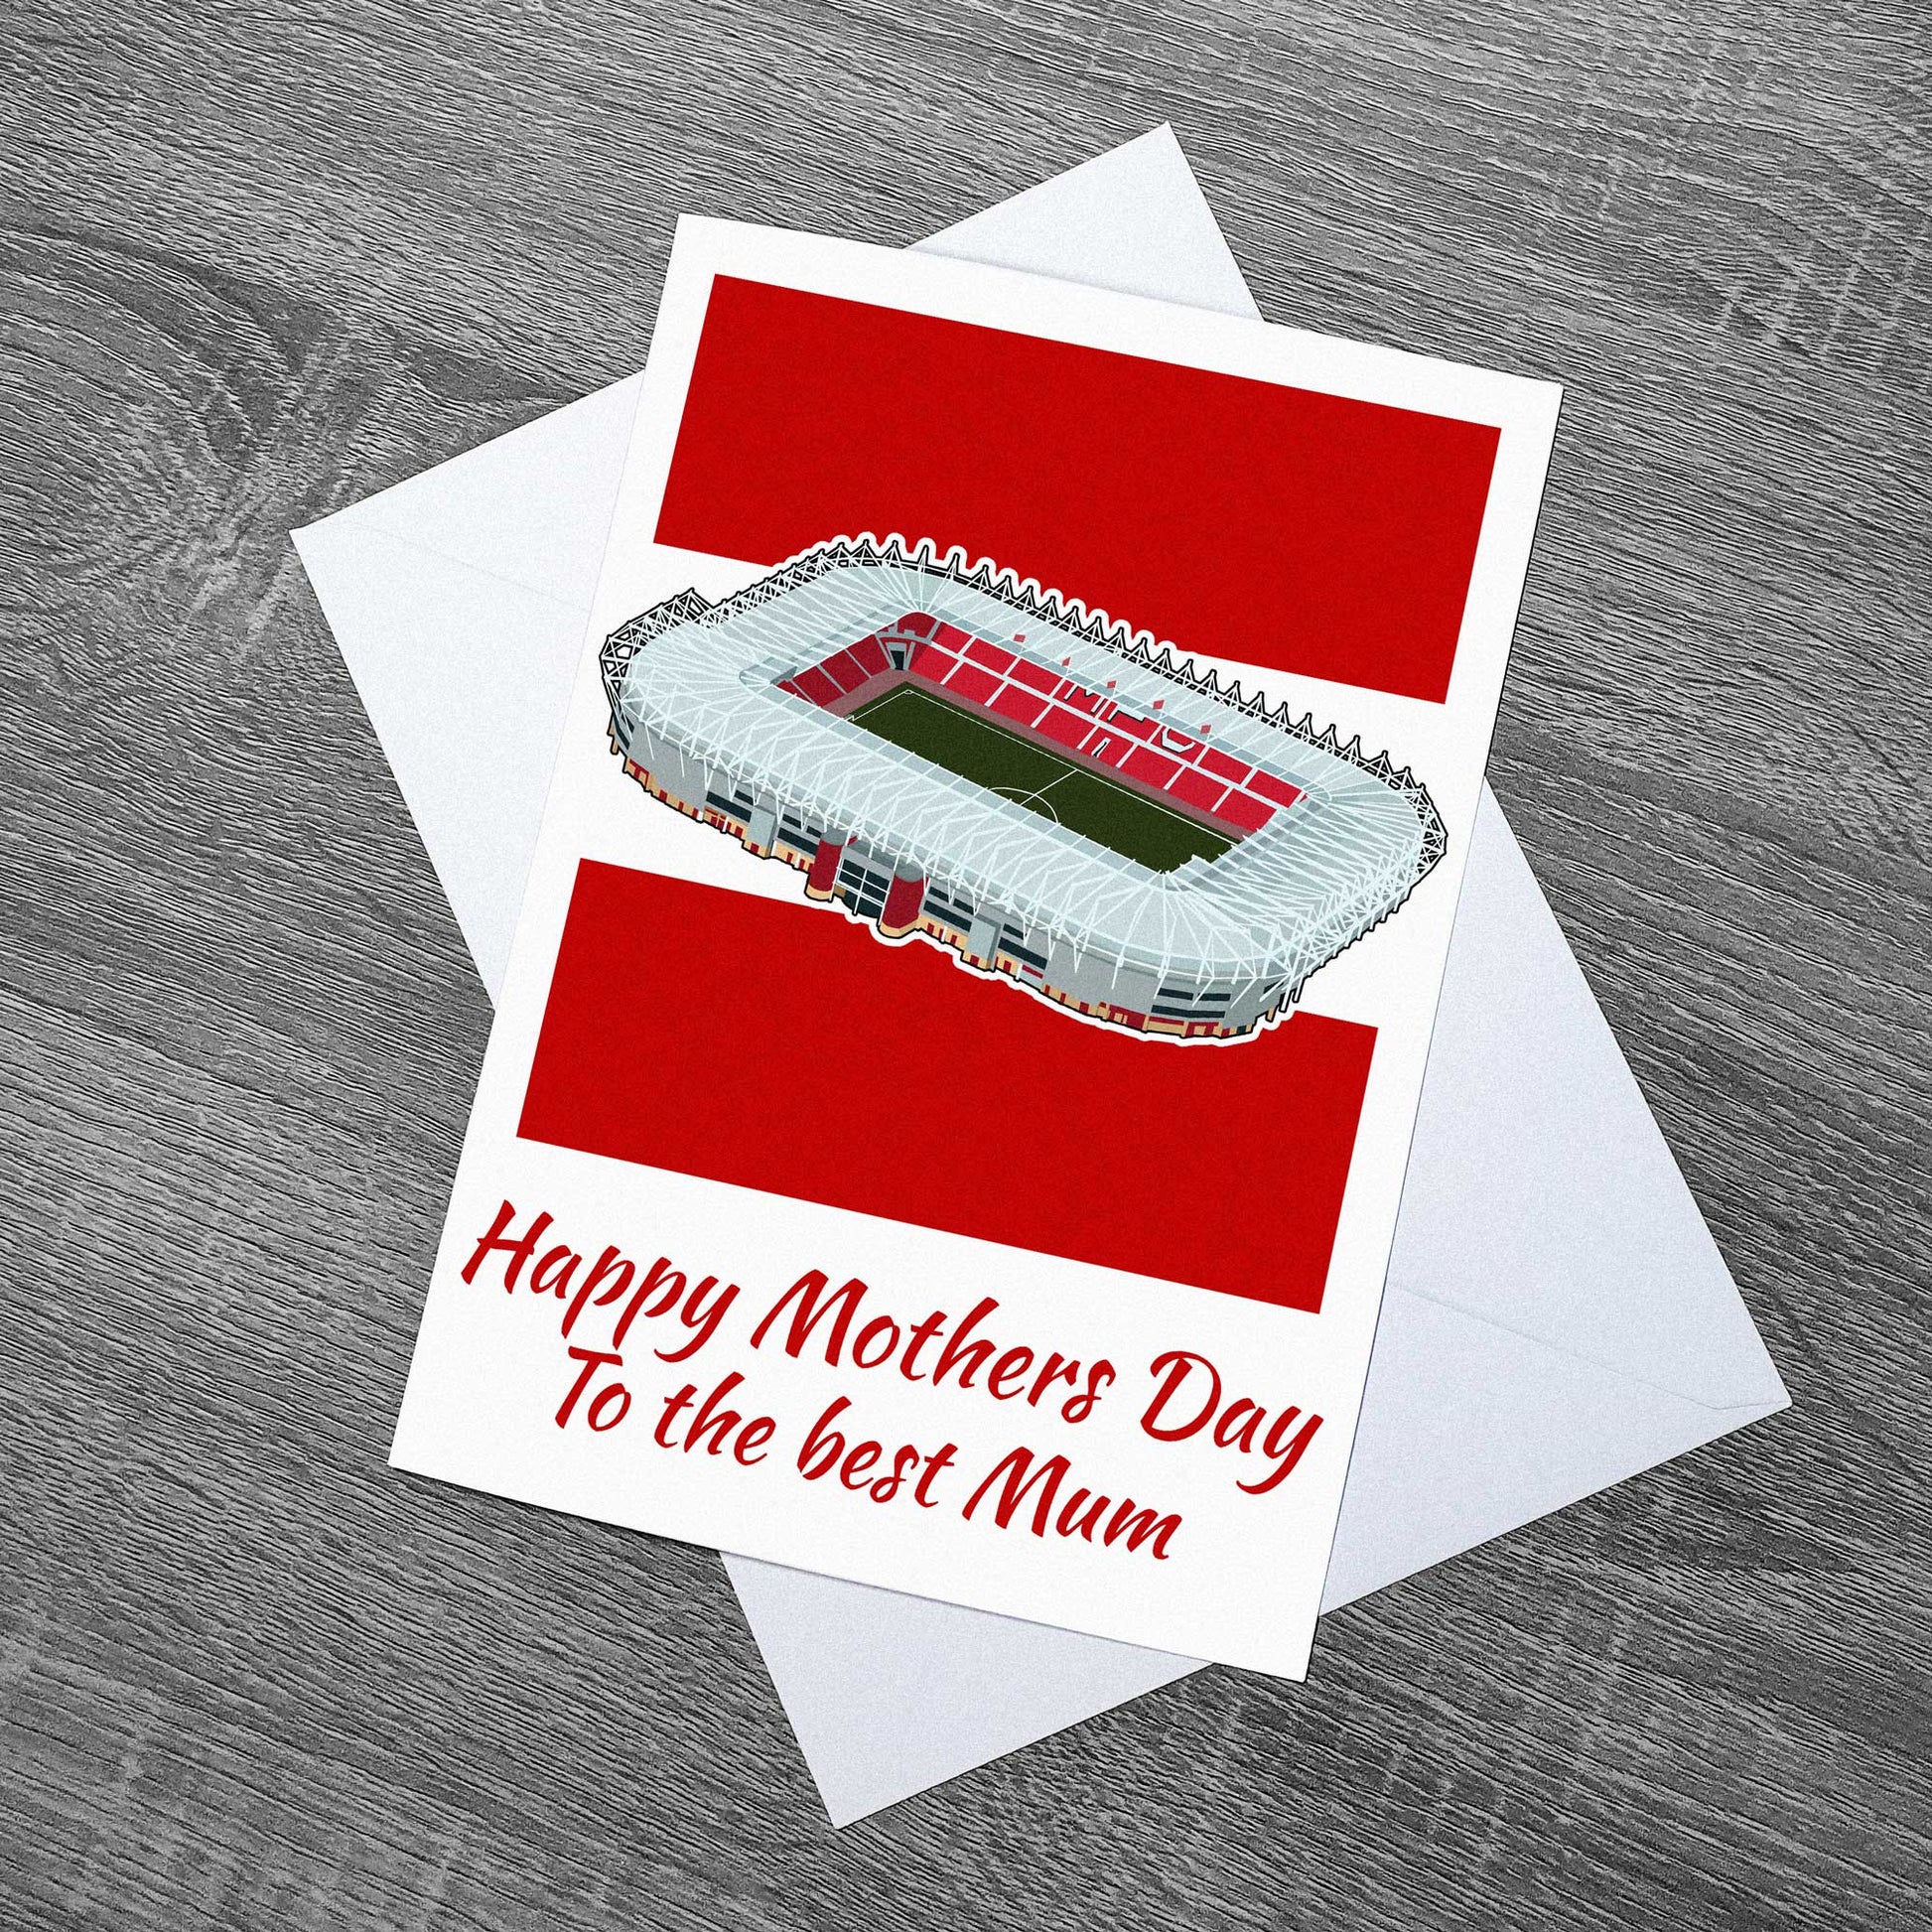 Mothers day card inspired by the Riverside Stadium, the home of Middlesbrough Football Club in North Yorkshire